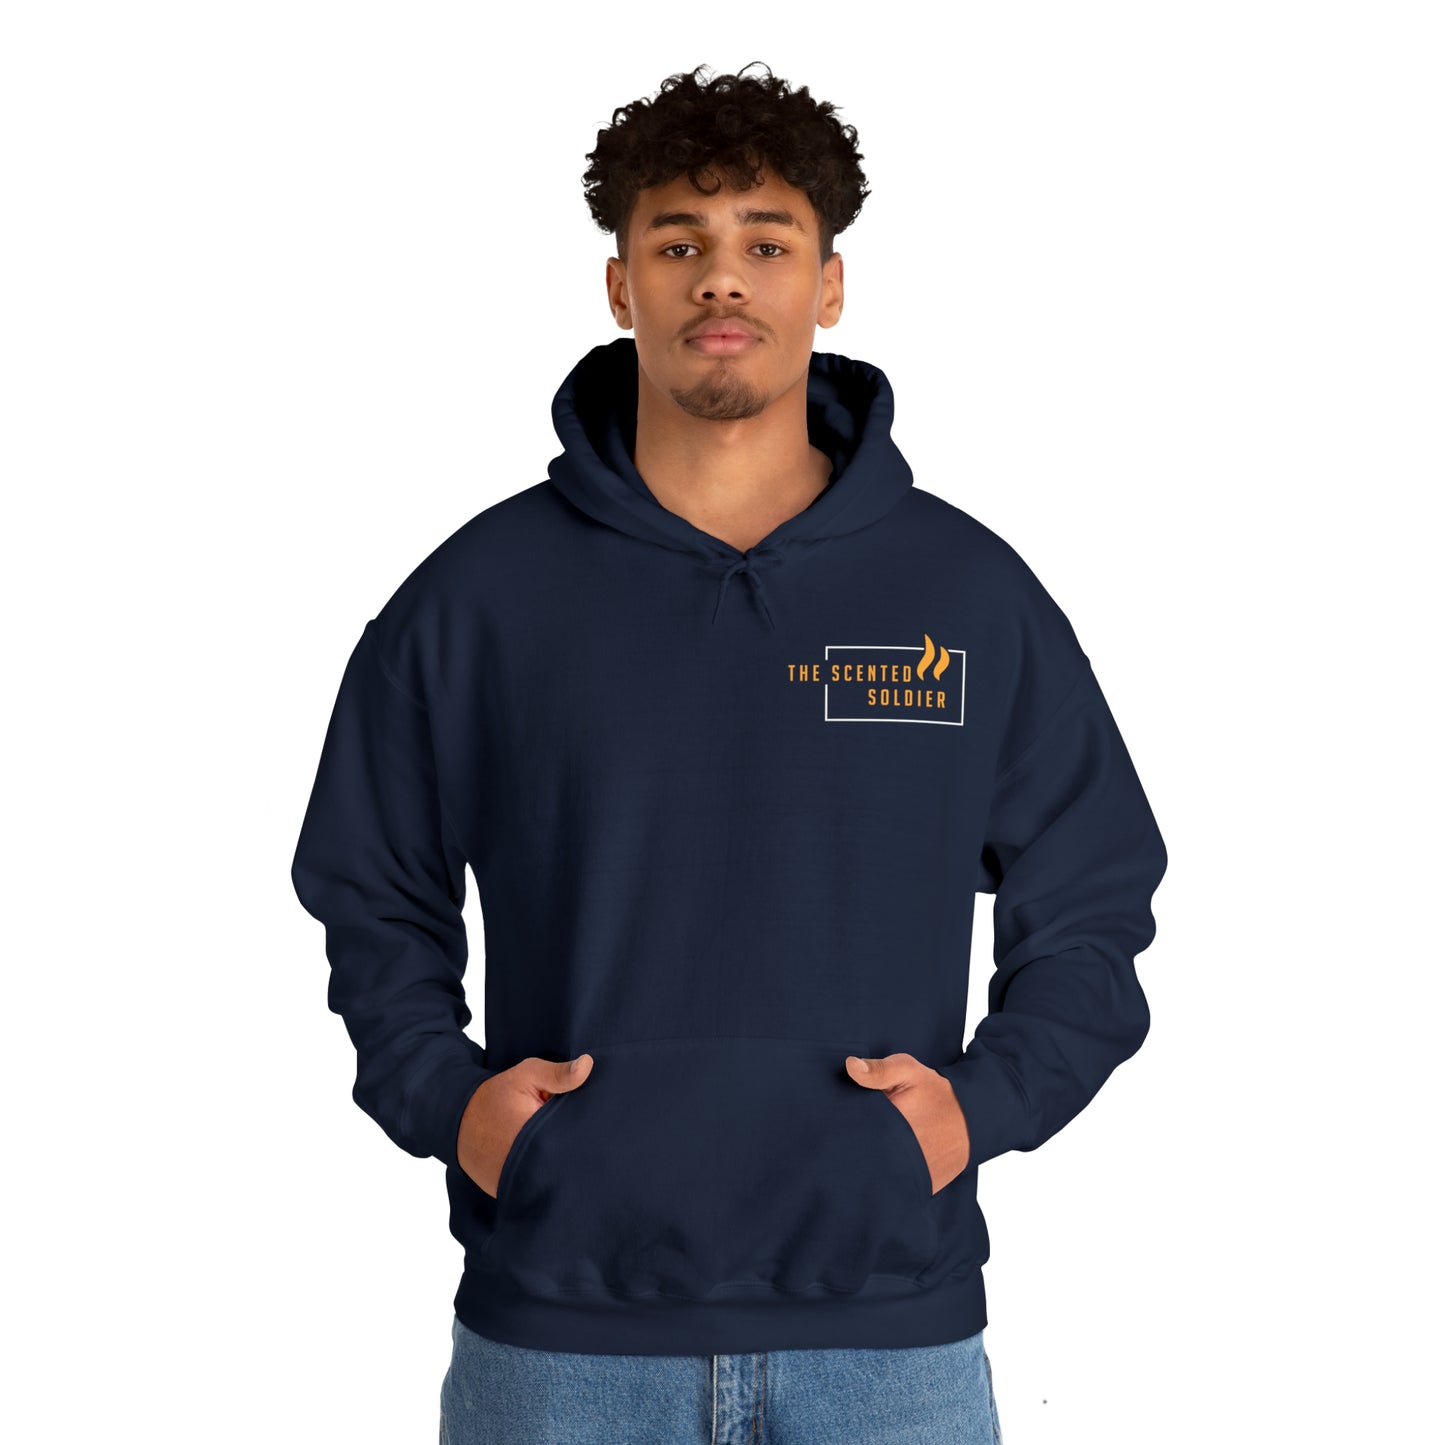 The Scented Soldier Unisex Heavy Blend™ Hooded Sweatshirt